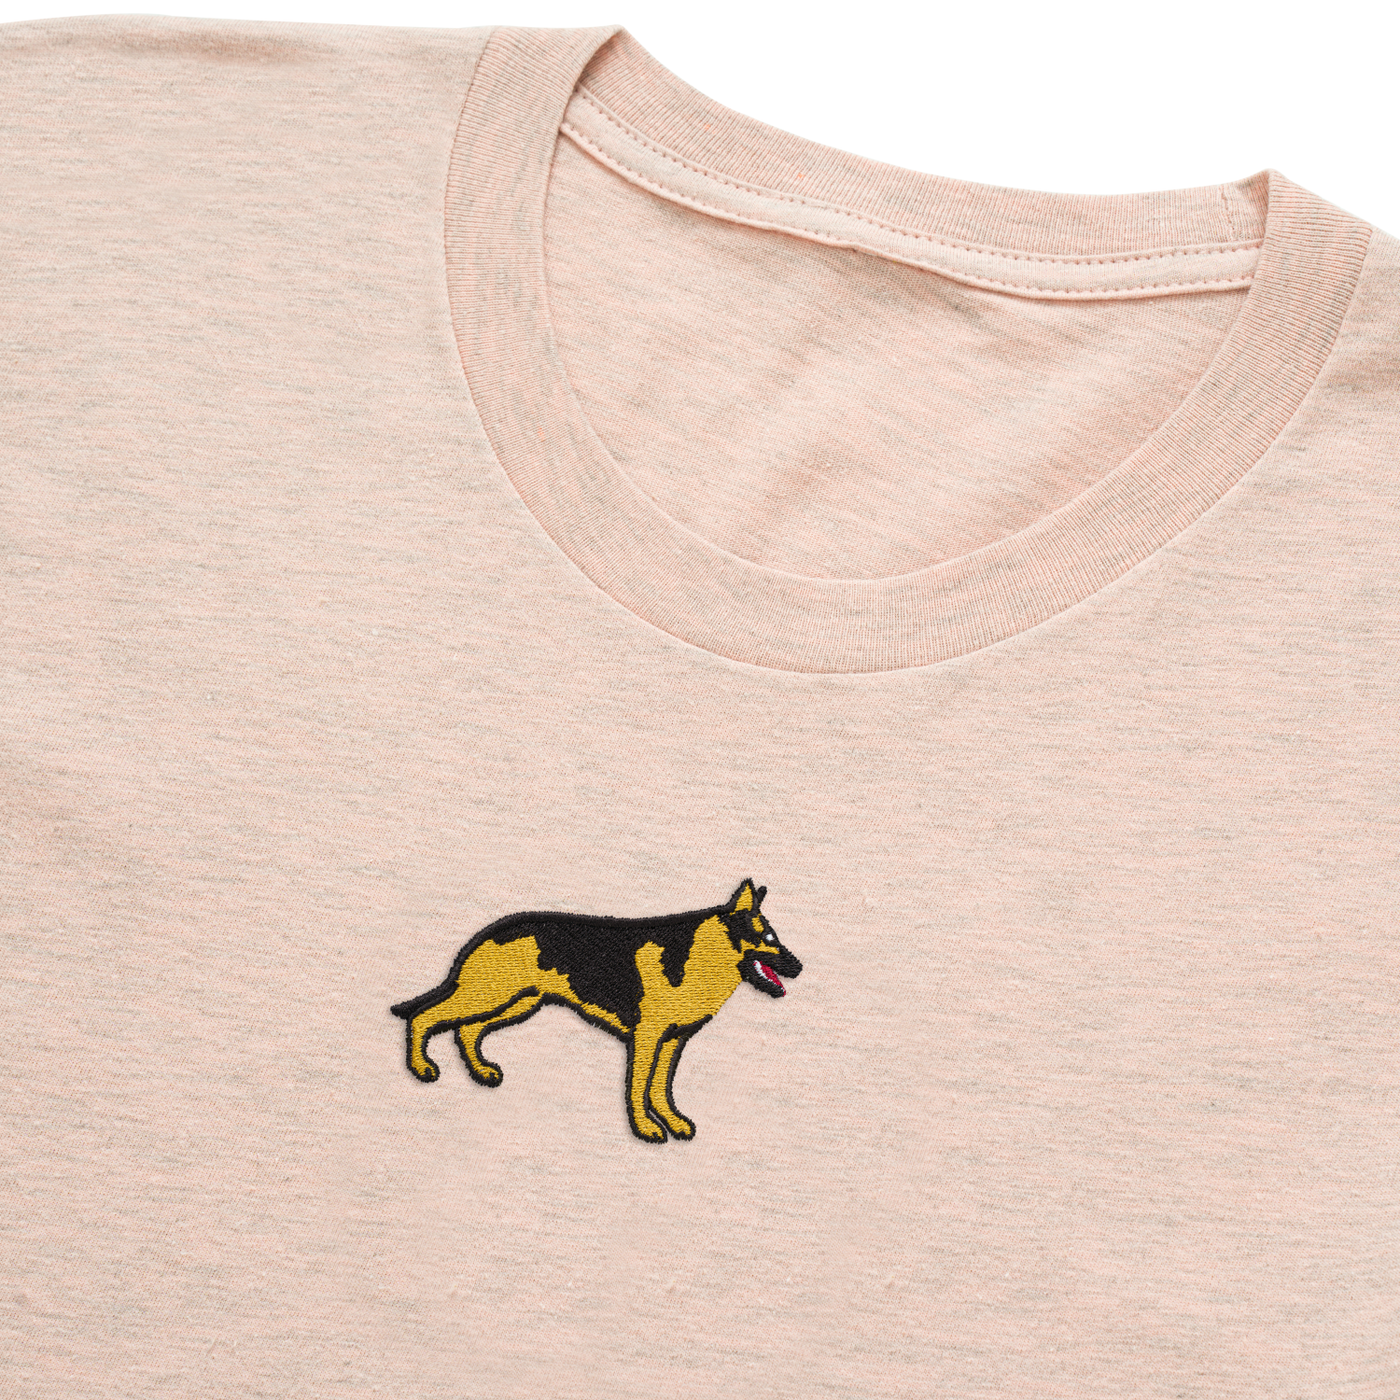 Bobby's Planet Women's Embroidered German Shepherd T-Shirt from Paws Dog Cat Animals Collection in Heather Prism Peach Color#color_heather-prism-peach